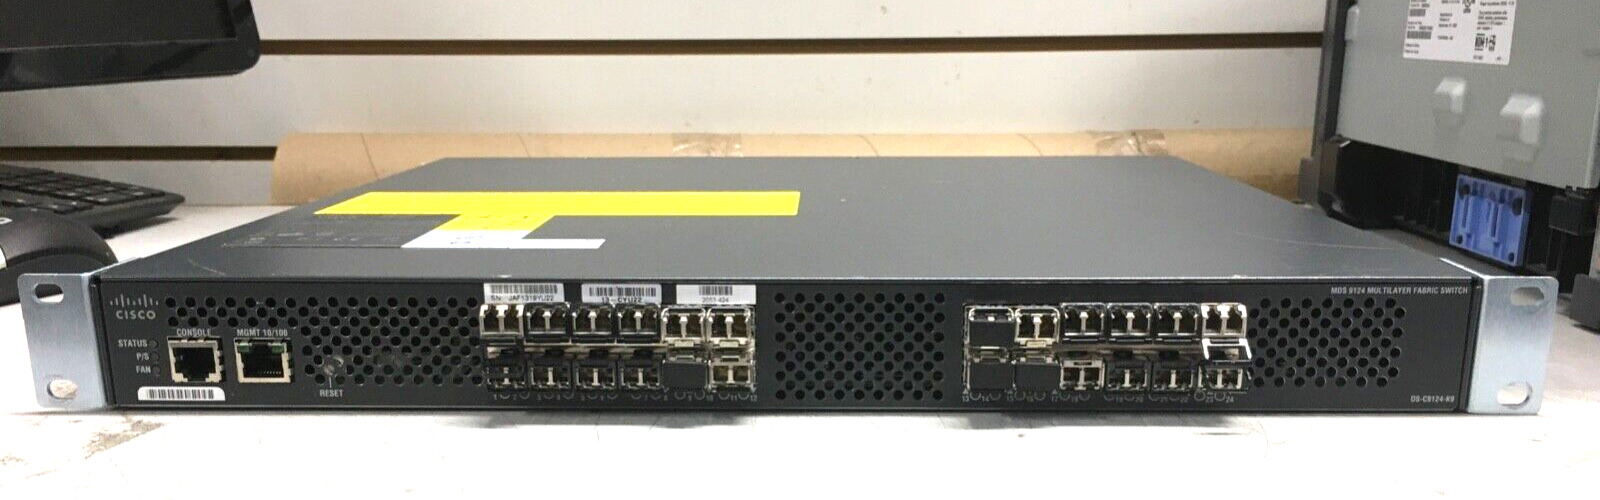 Cisco MDS 9124 24-Port Multilayer Fabric Switch DS-C9124-K9 V04 DC Power #2